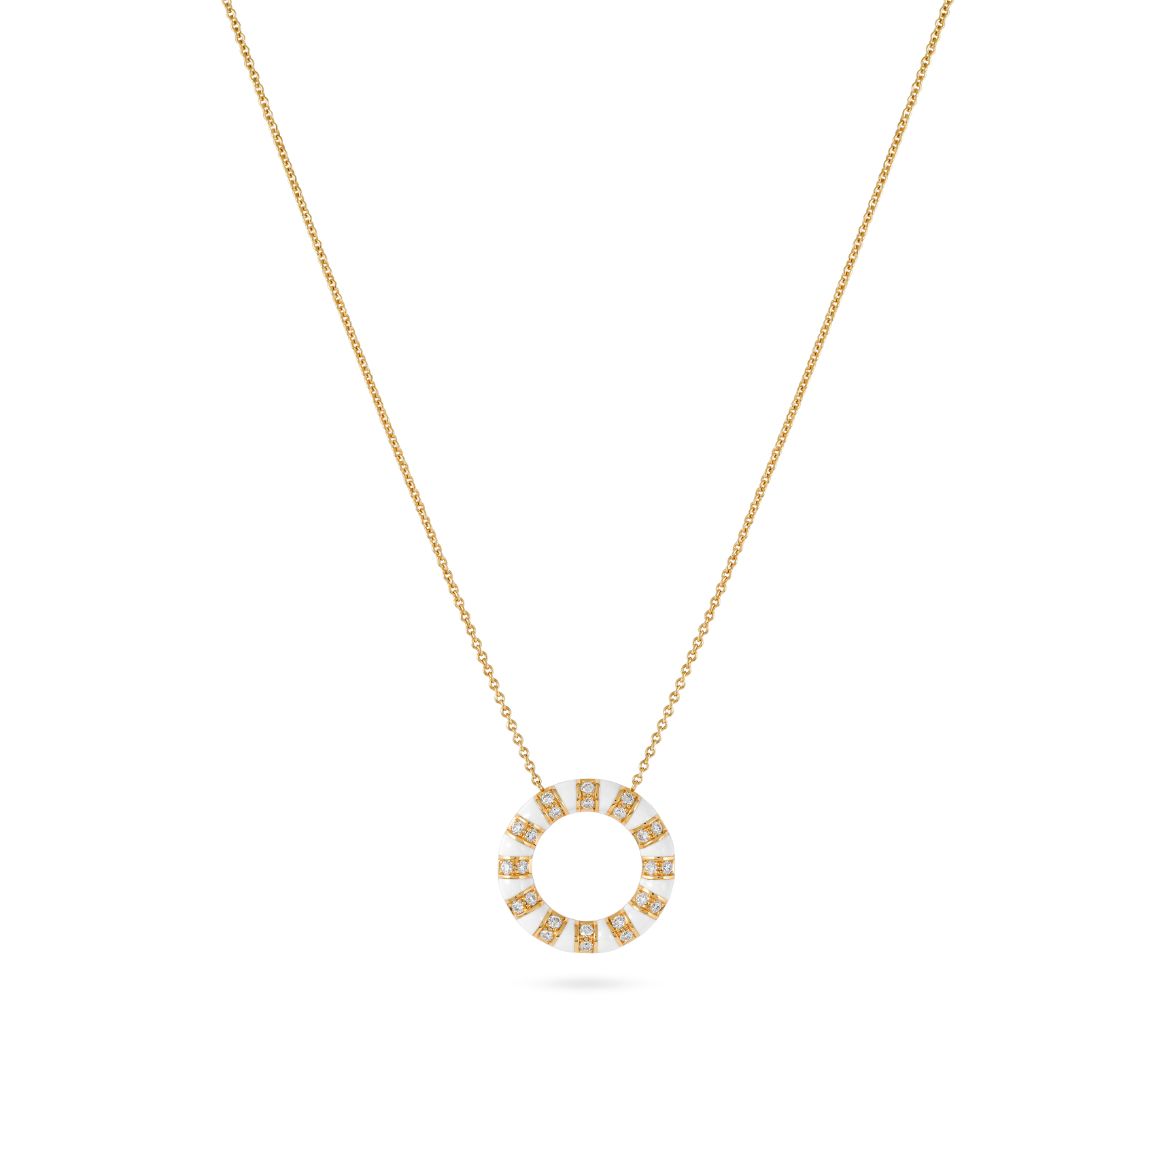 The Treasure Round Pendant in 18k gold with White Stone